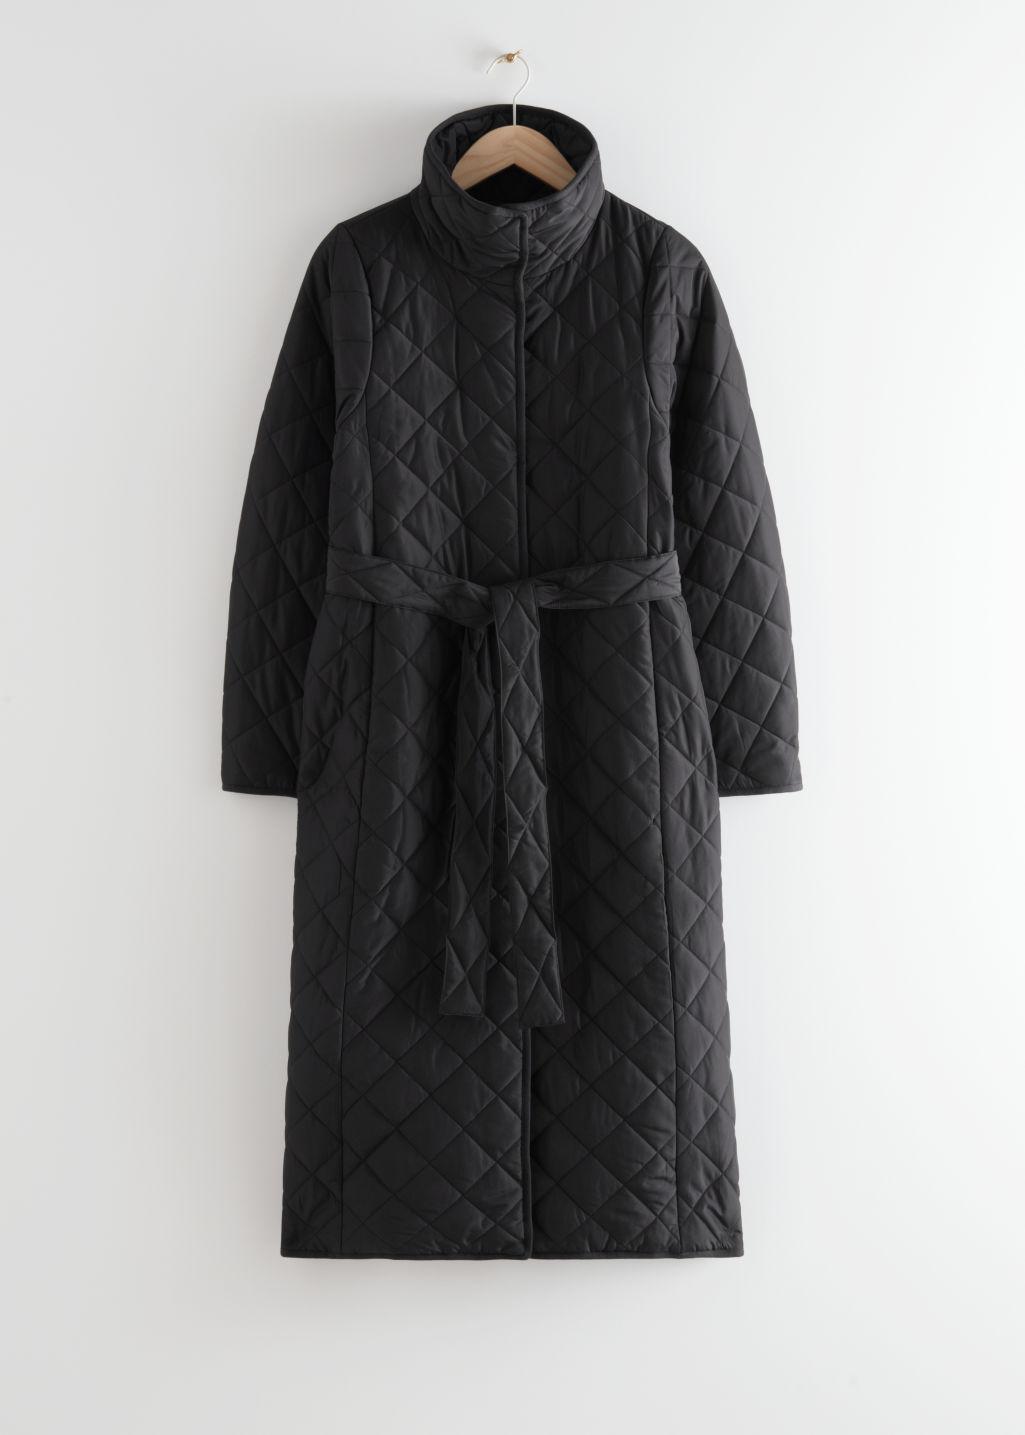 & Other Stories Belted Quilted Coat in Black | Lyst